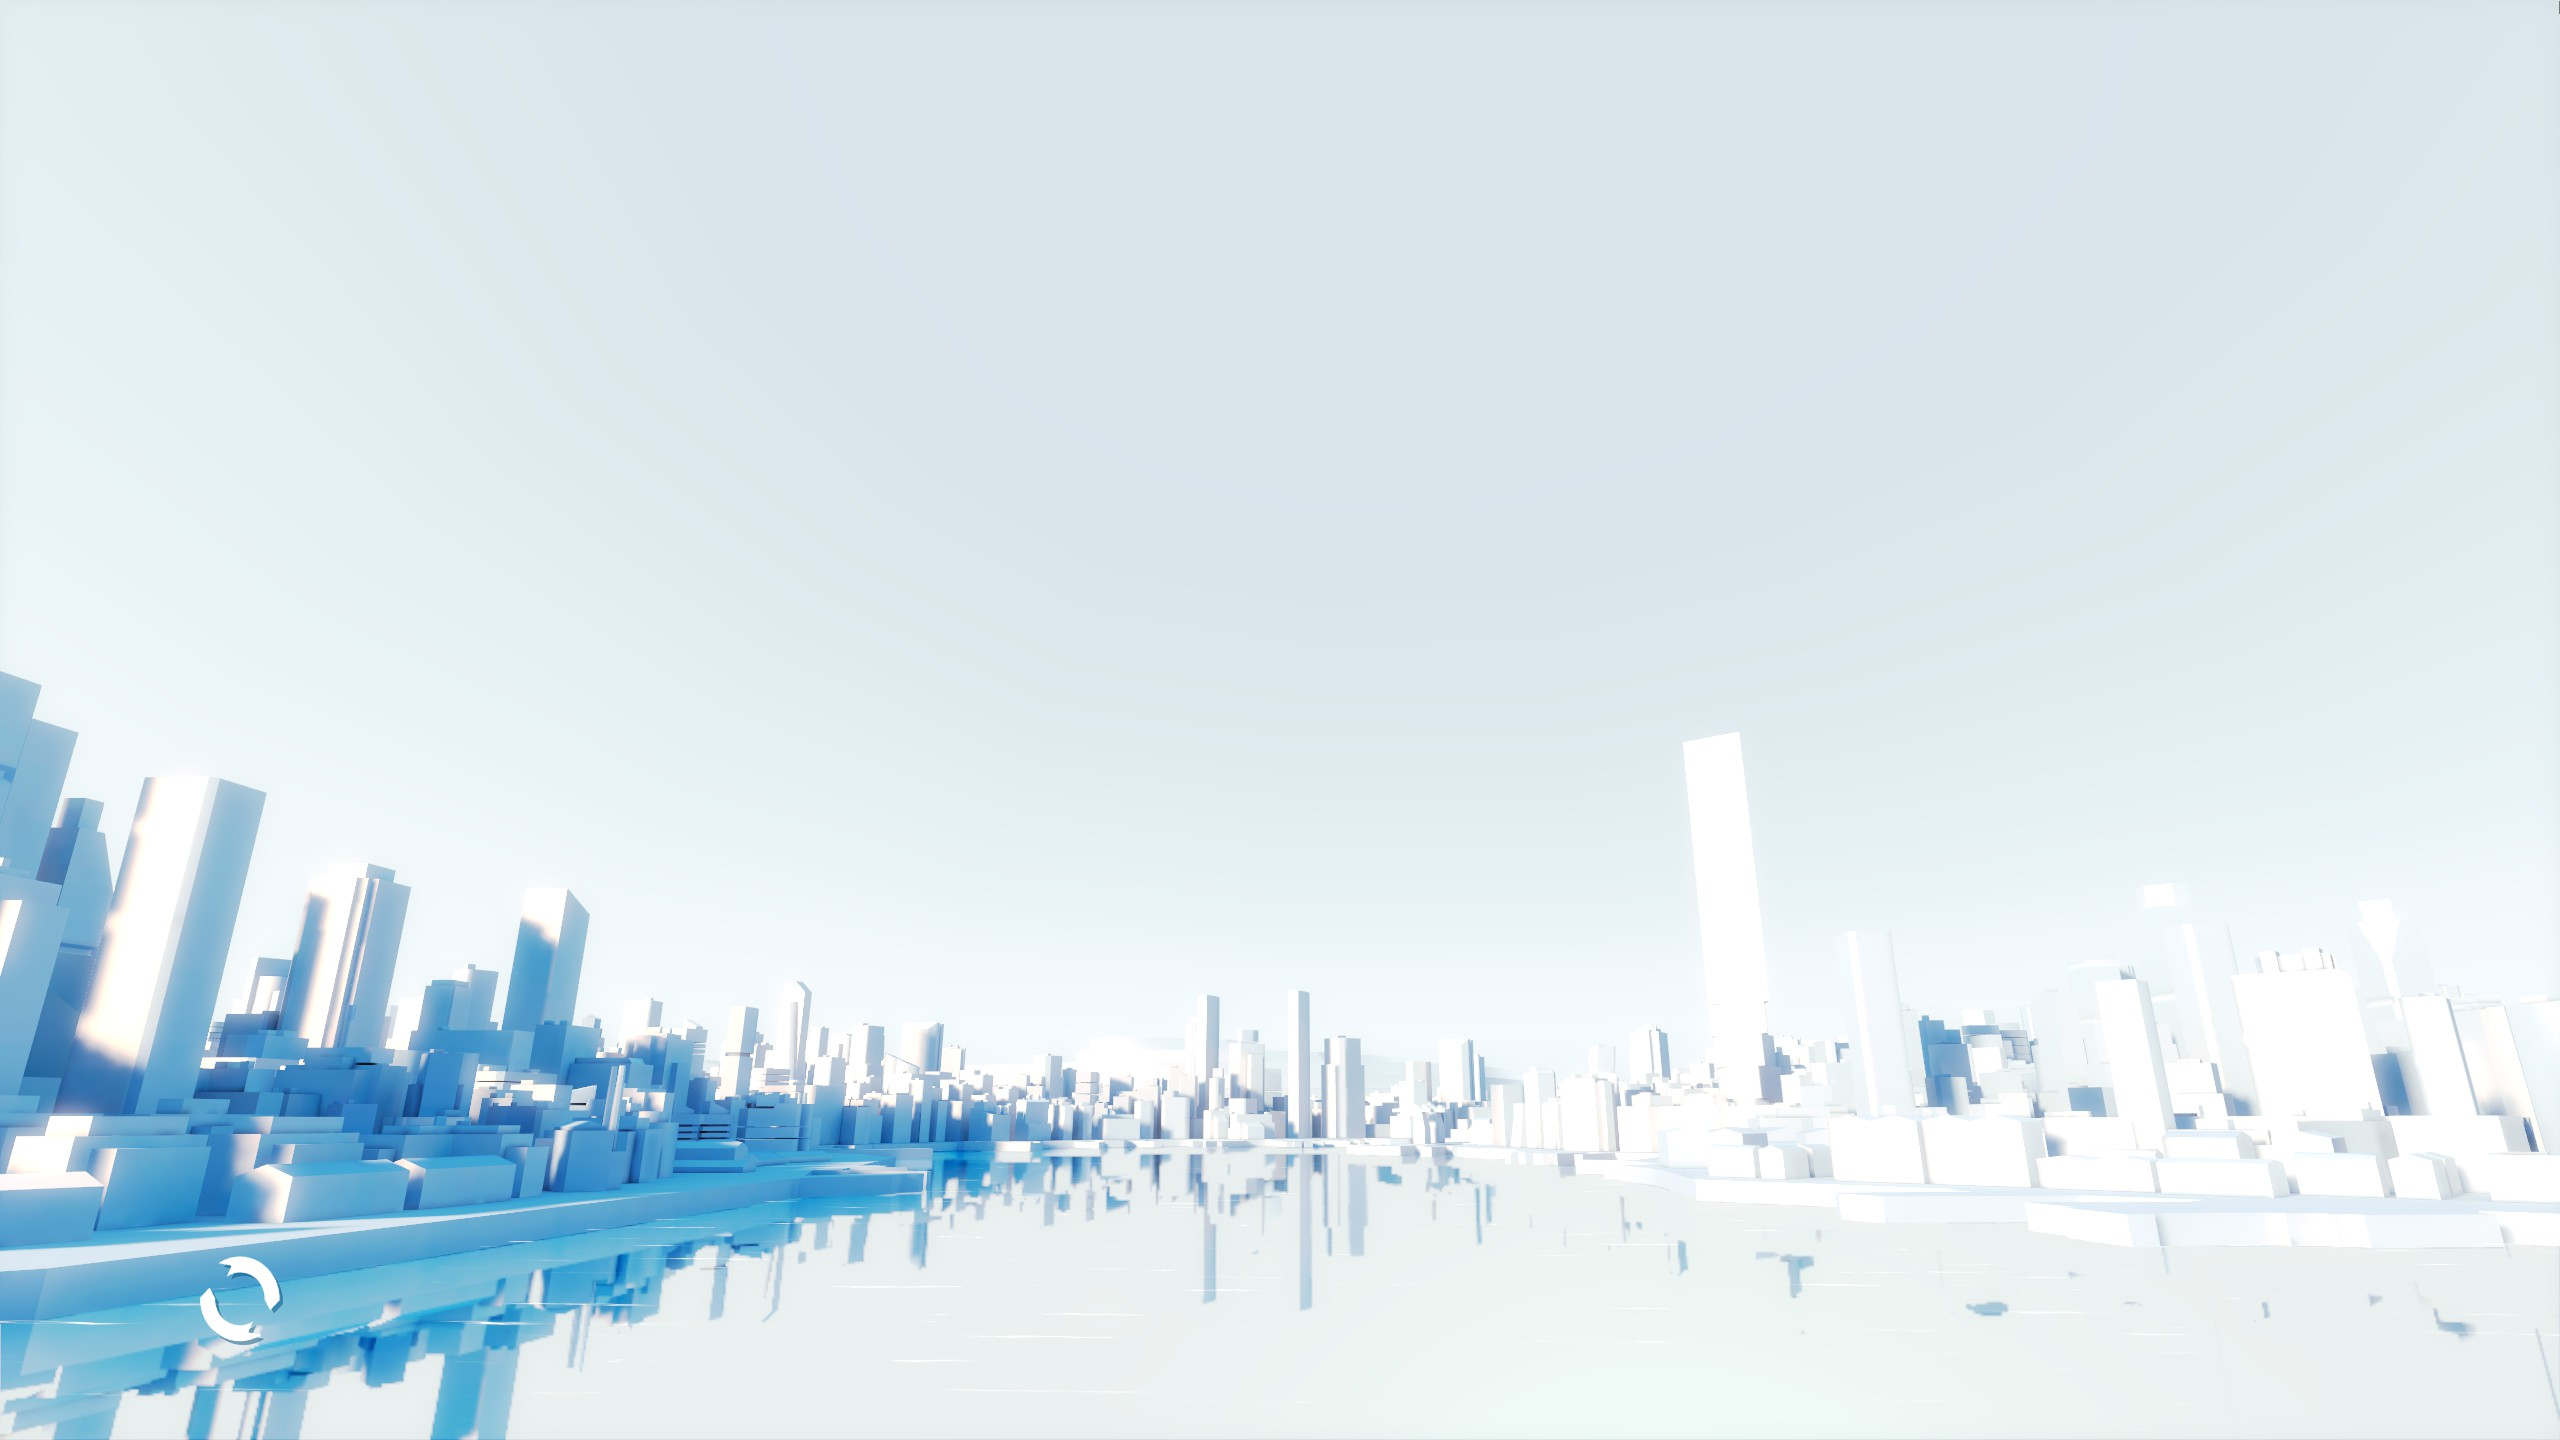 Mirror's Edge menu screen. Notice how shadows are blue, not gray.